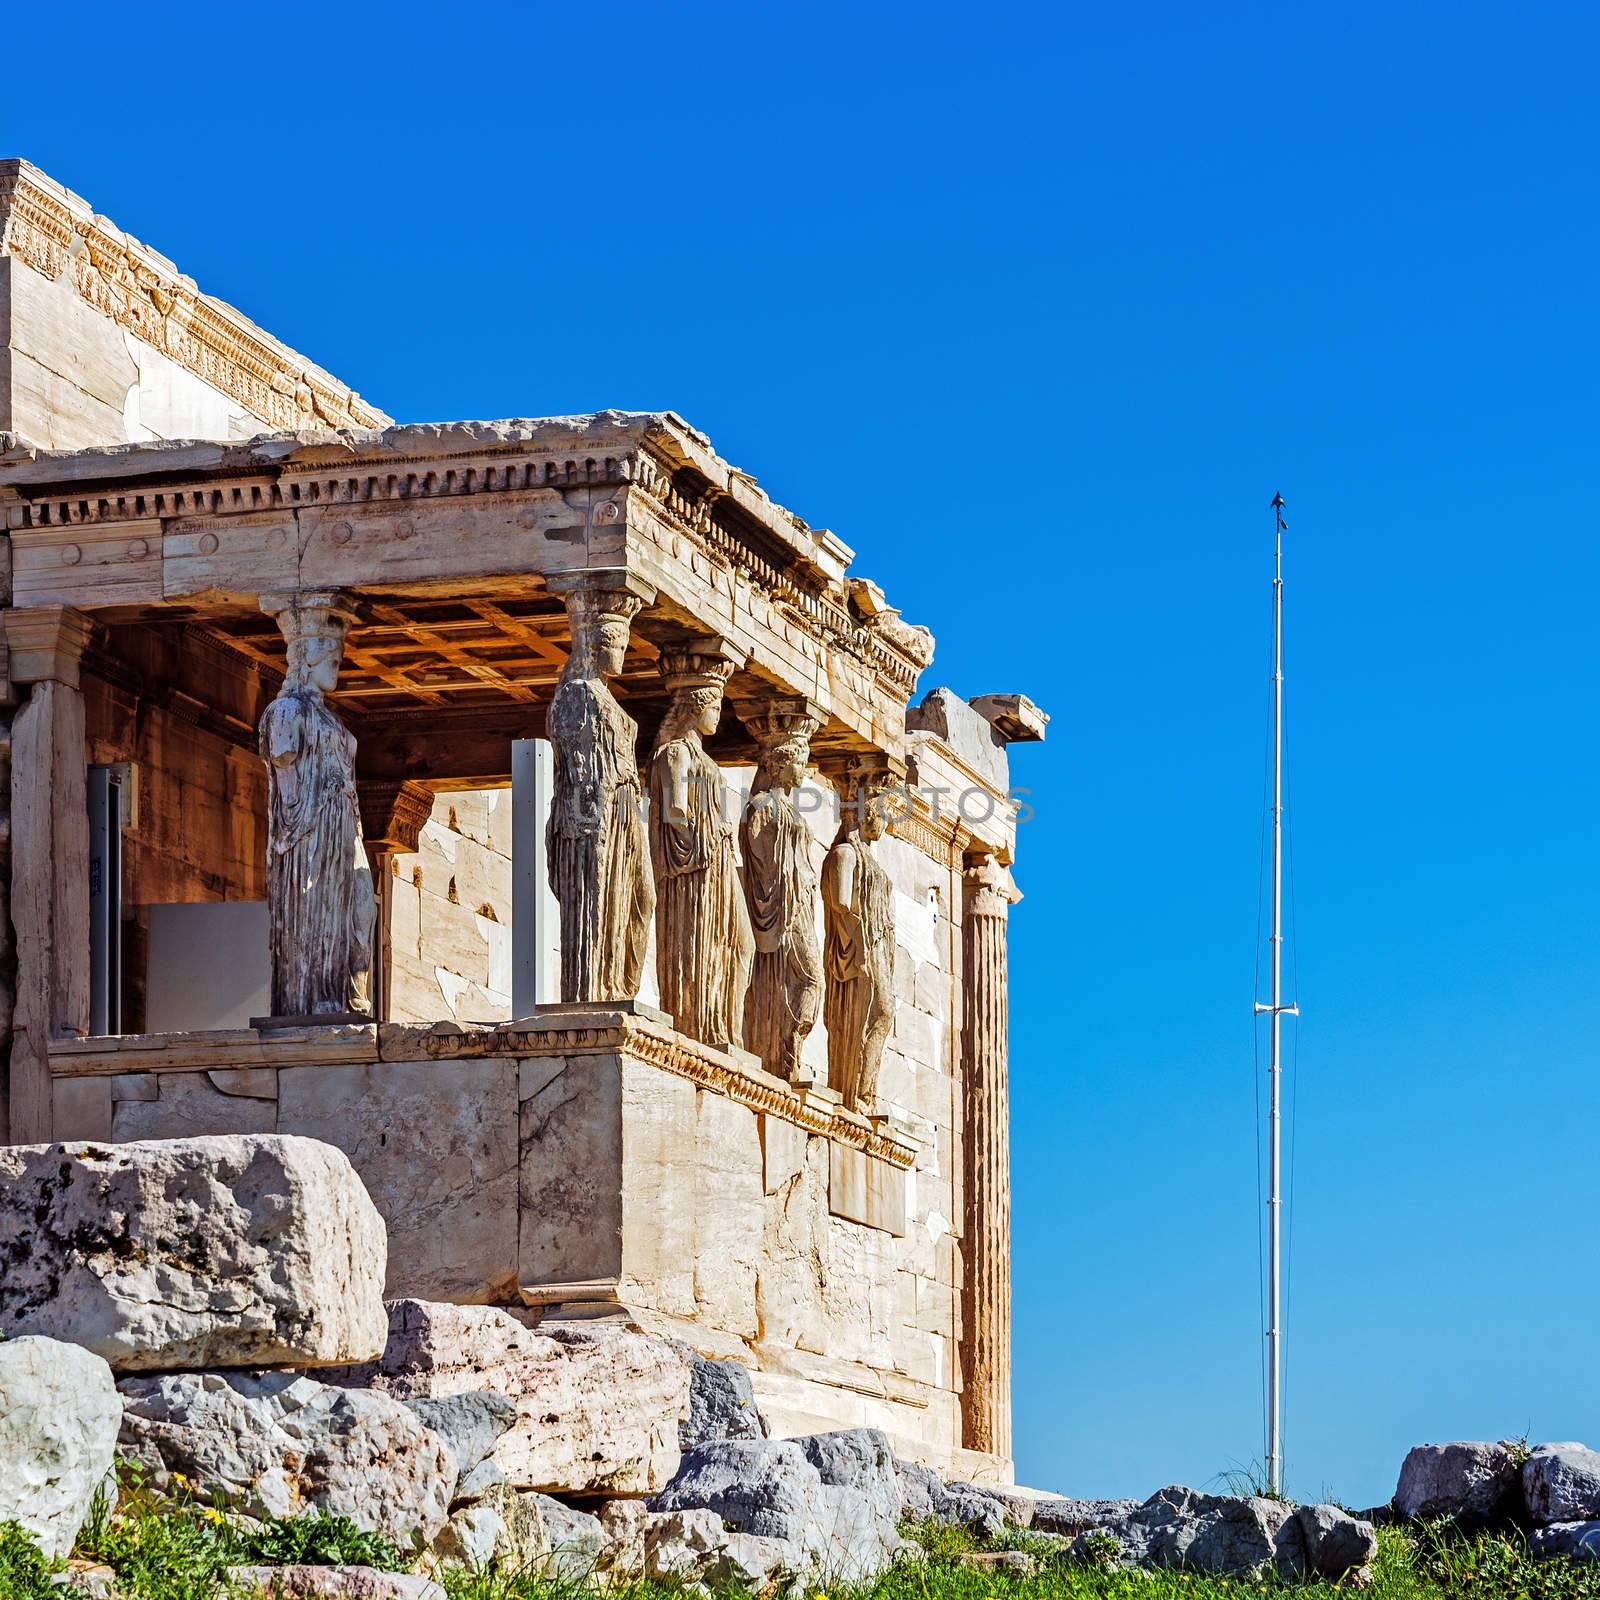 The Old Temple of Athena, an archaic temple located on the Acropolis of Athens, built around 525-500 BC. Taken in Athens, Greece.